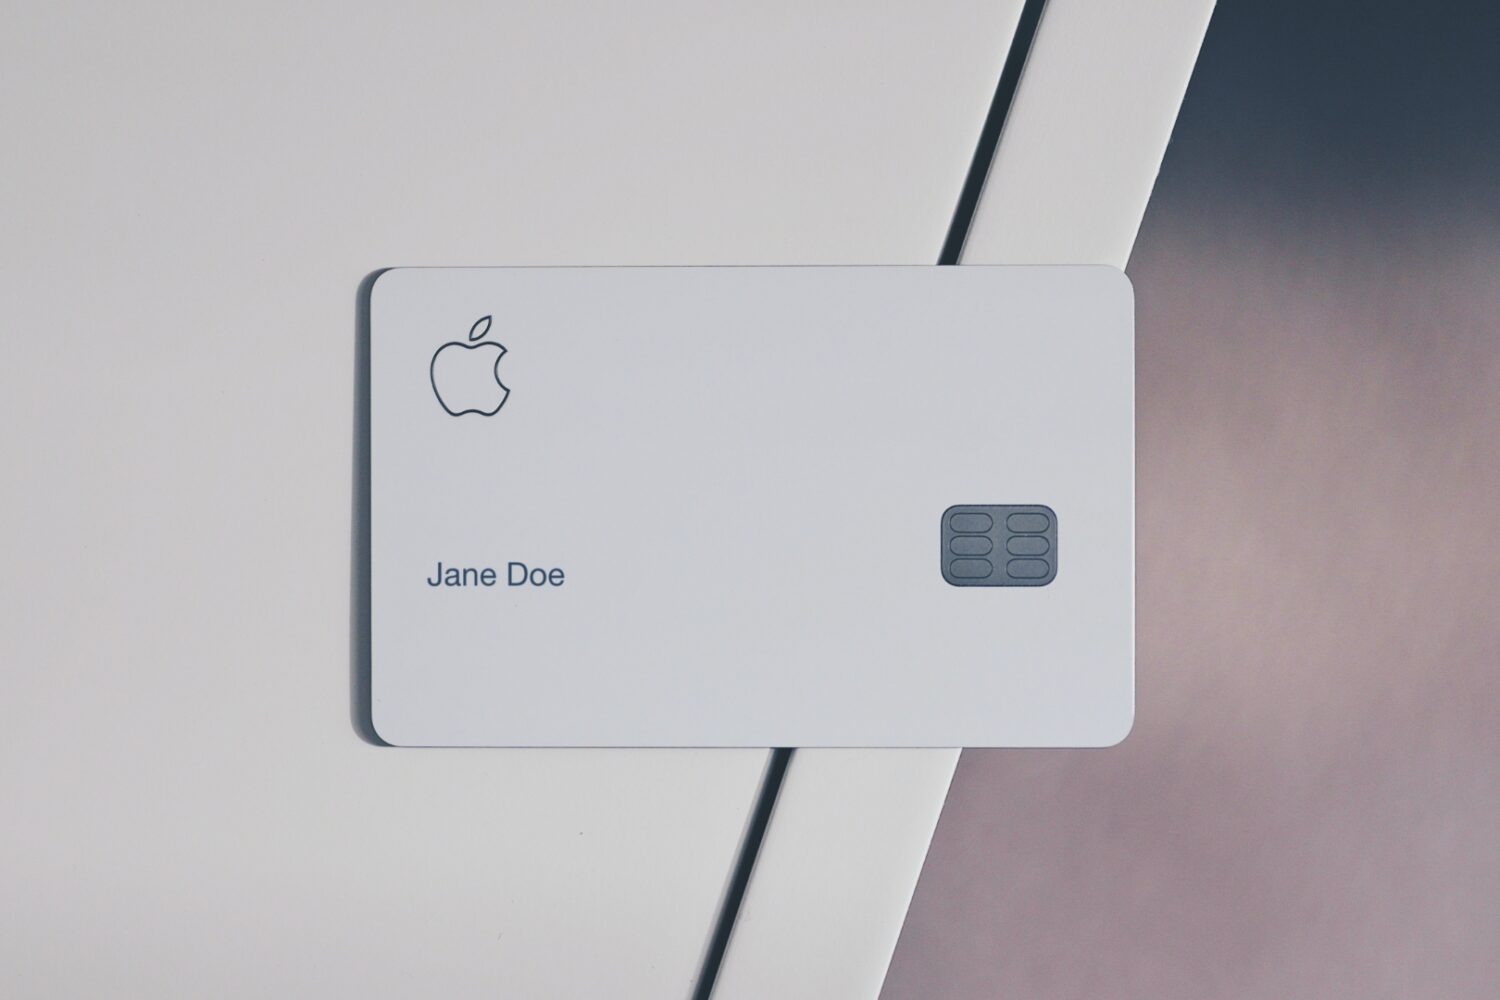 Apple Card with the Jane Doe name near the edge of a white desk